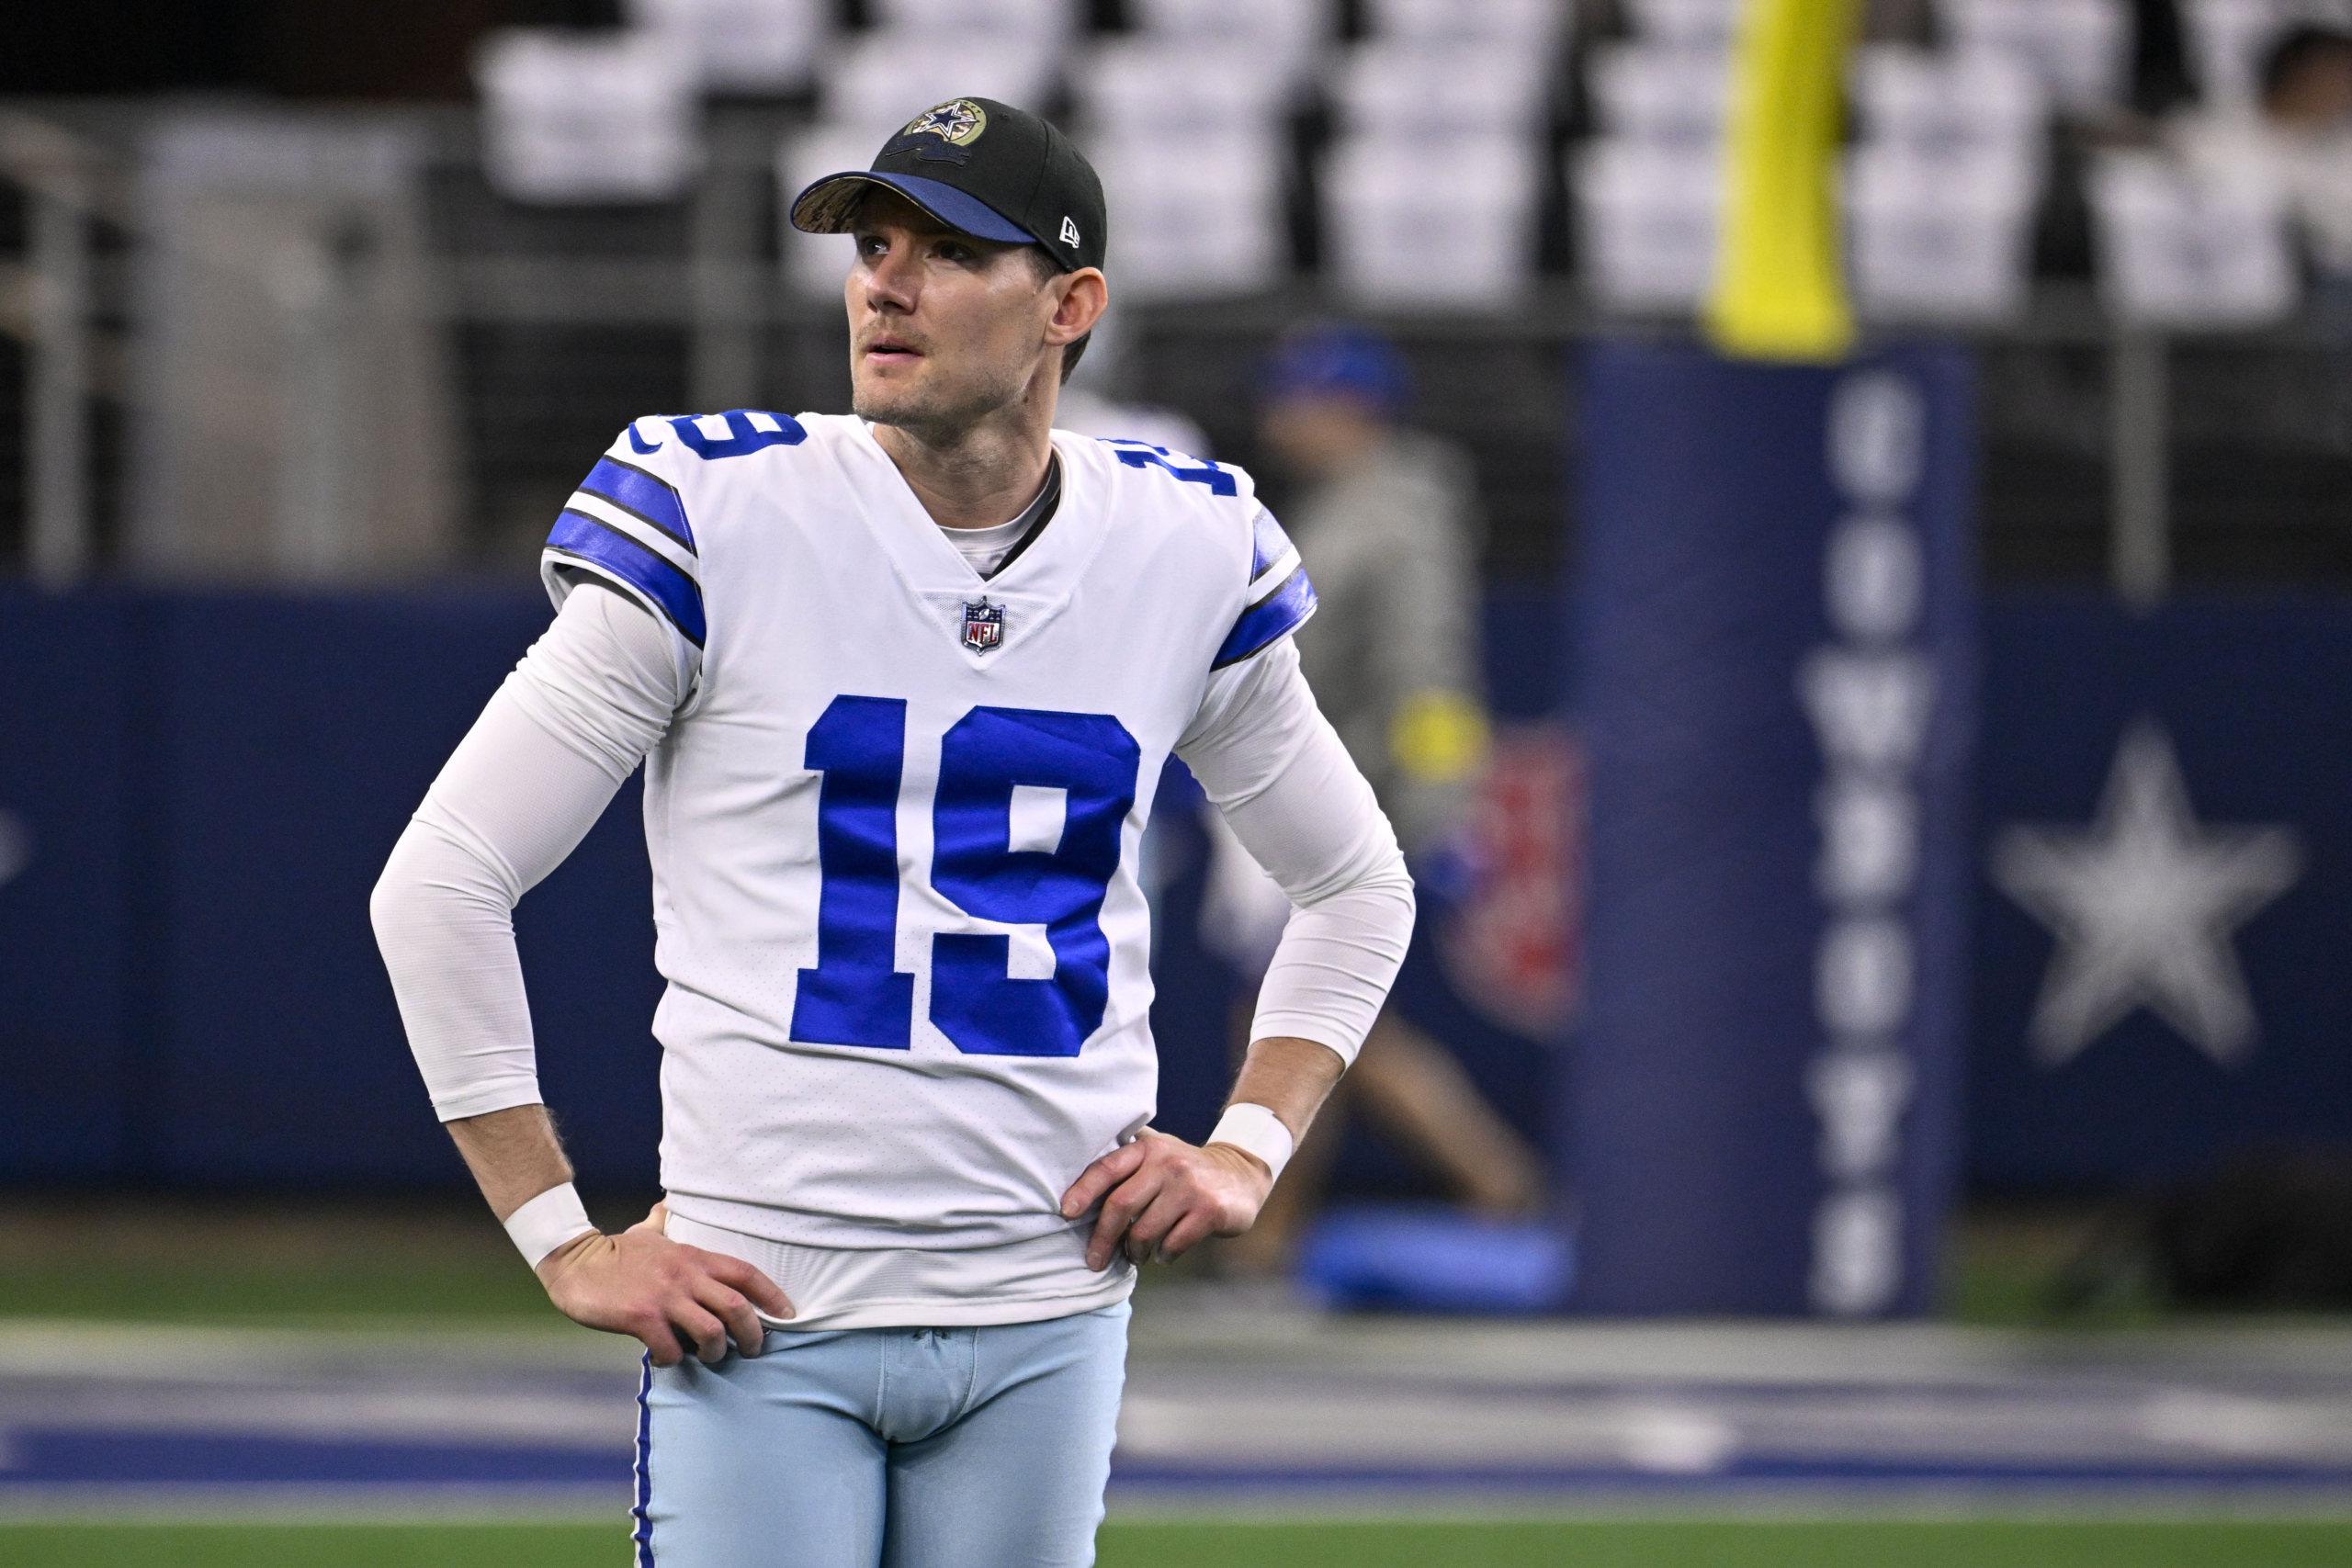 Dallas Cowboys kicker Brett Maher breaks NFL record with 4 missed extra points